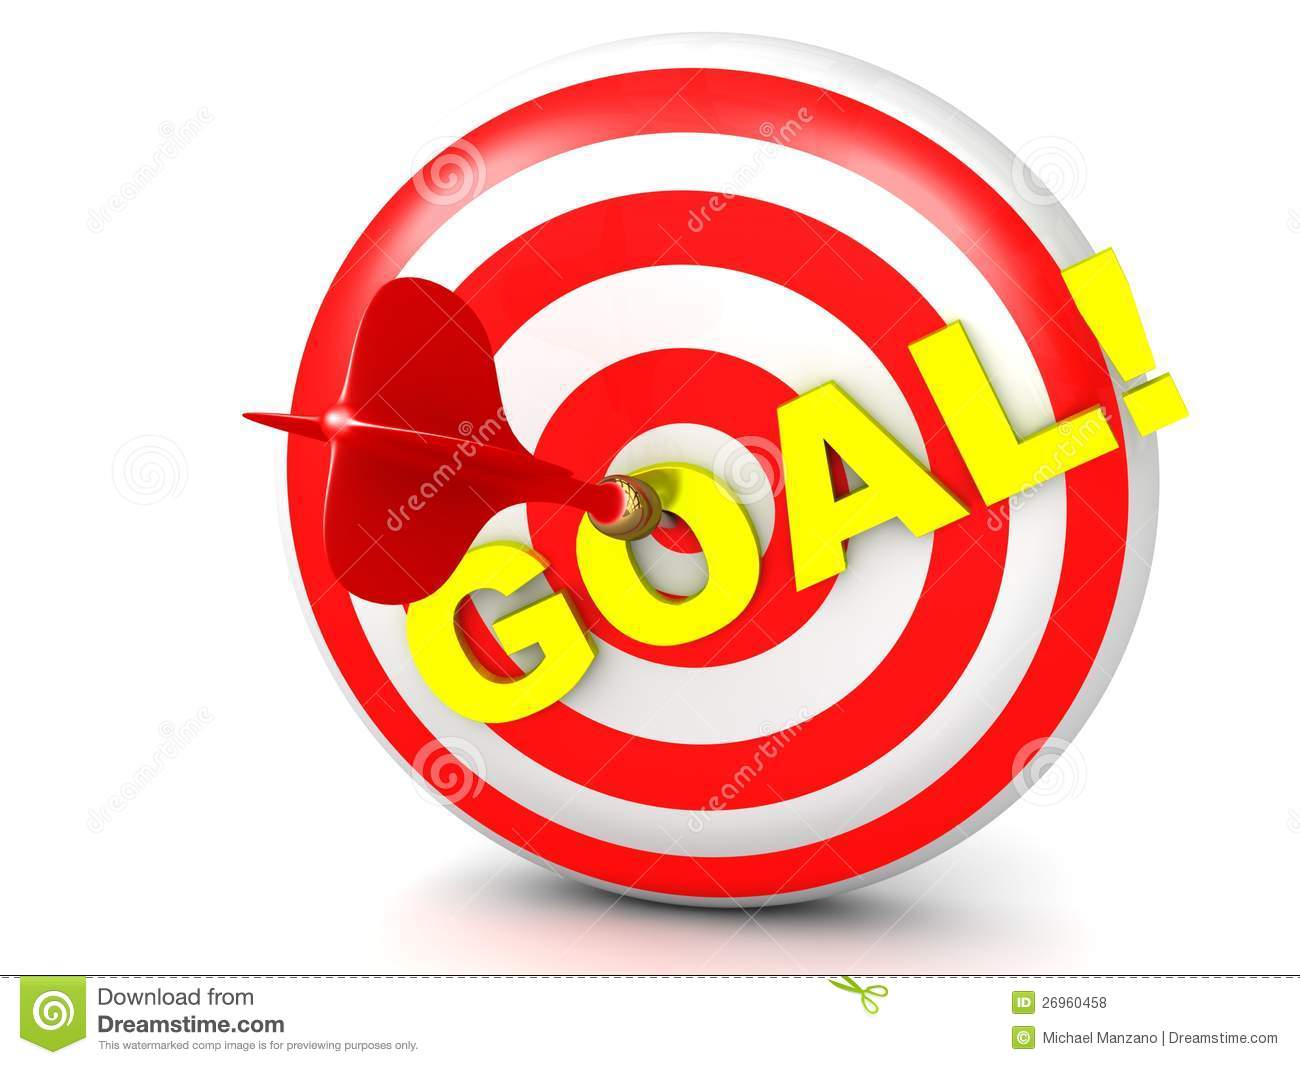     Of A Red Dart Hitting The Gold Target Goal On An Archery Target